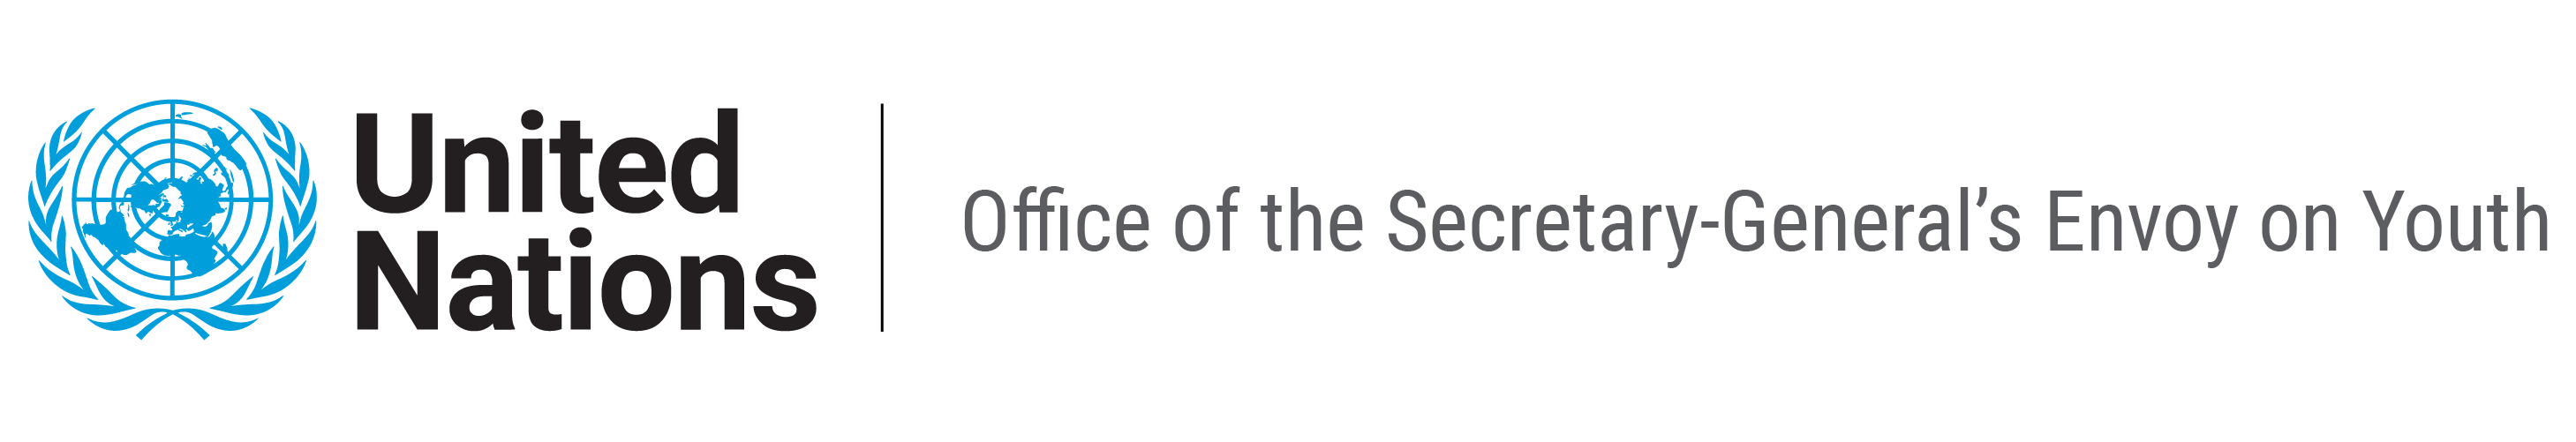 Office of the Secretary-General’s Envoy on Youth Logo